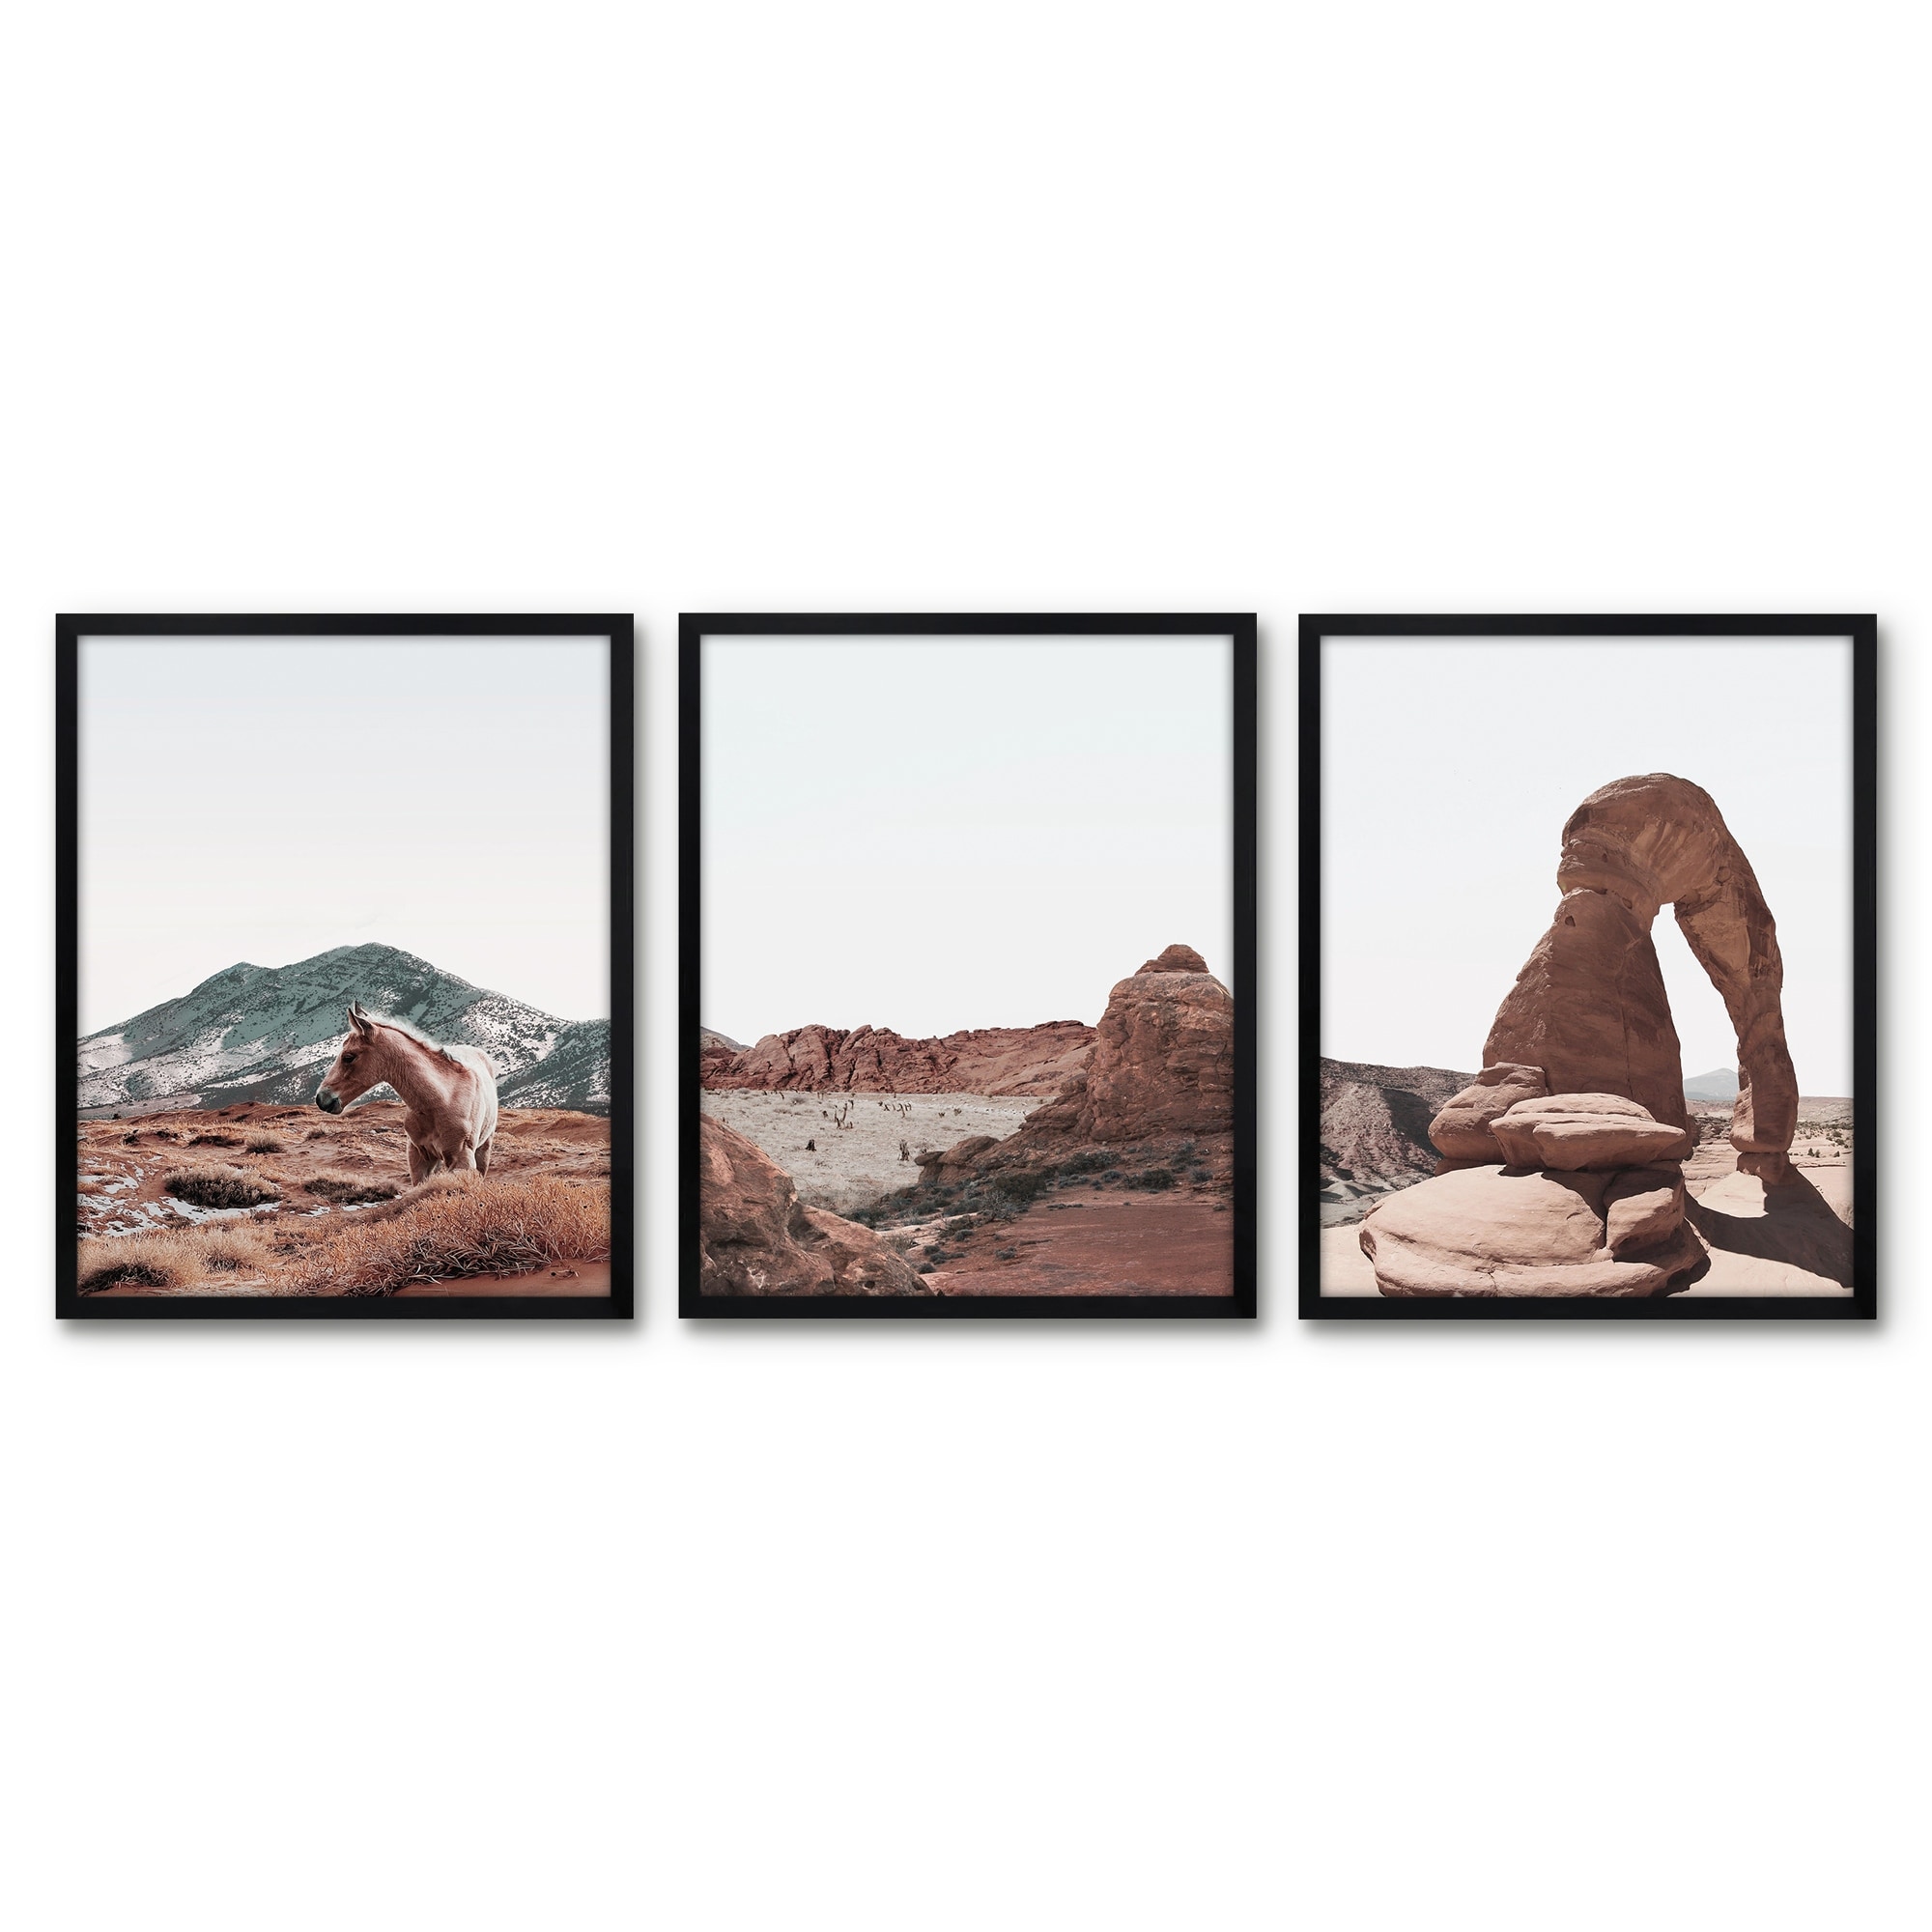 Americanflat 3 Piece 8x10 Unmatted Framed Print Set - National Park Canada  by Artvir